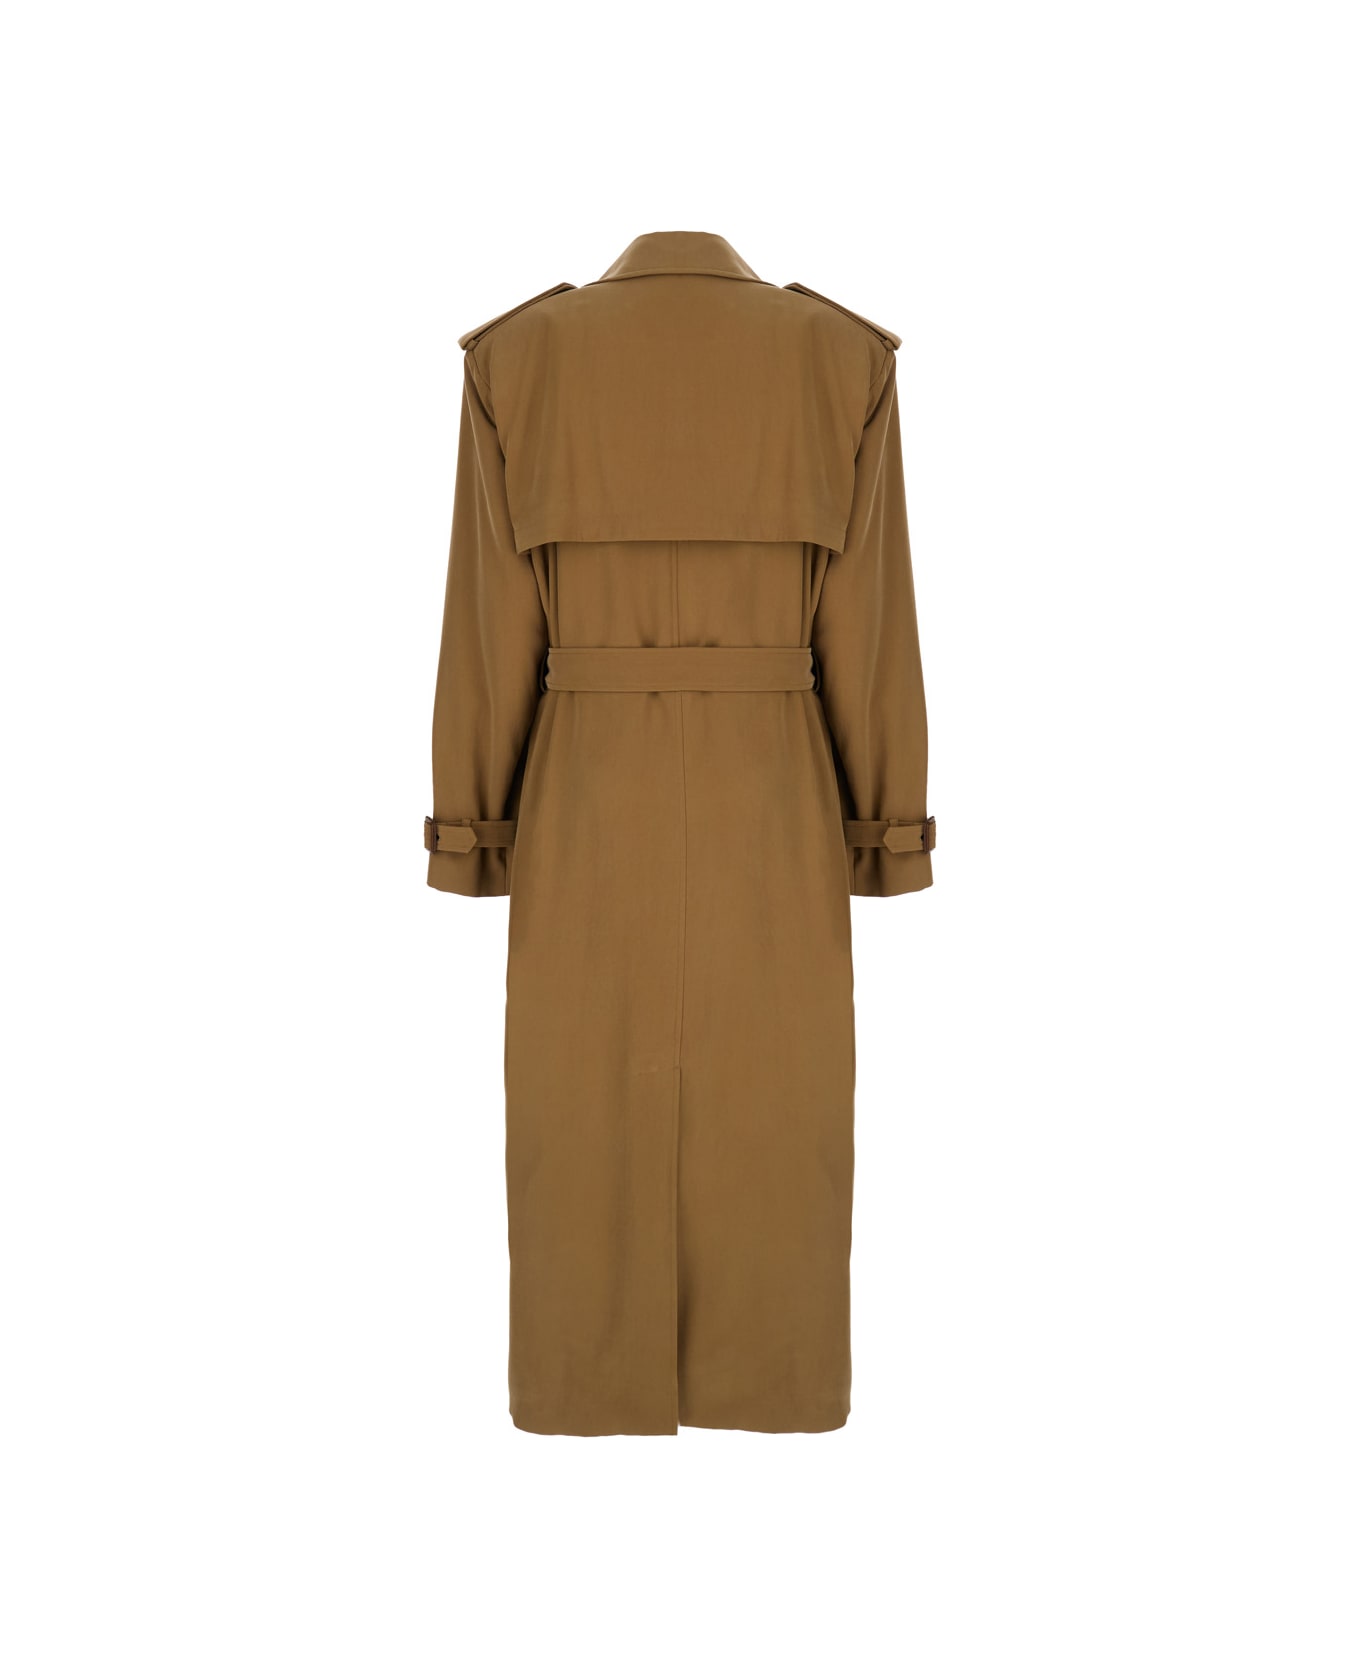 Saint Laurent Brown Single-breasted Trench Coat In Viscose Blend Woman - Beige